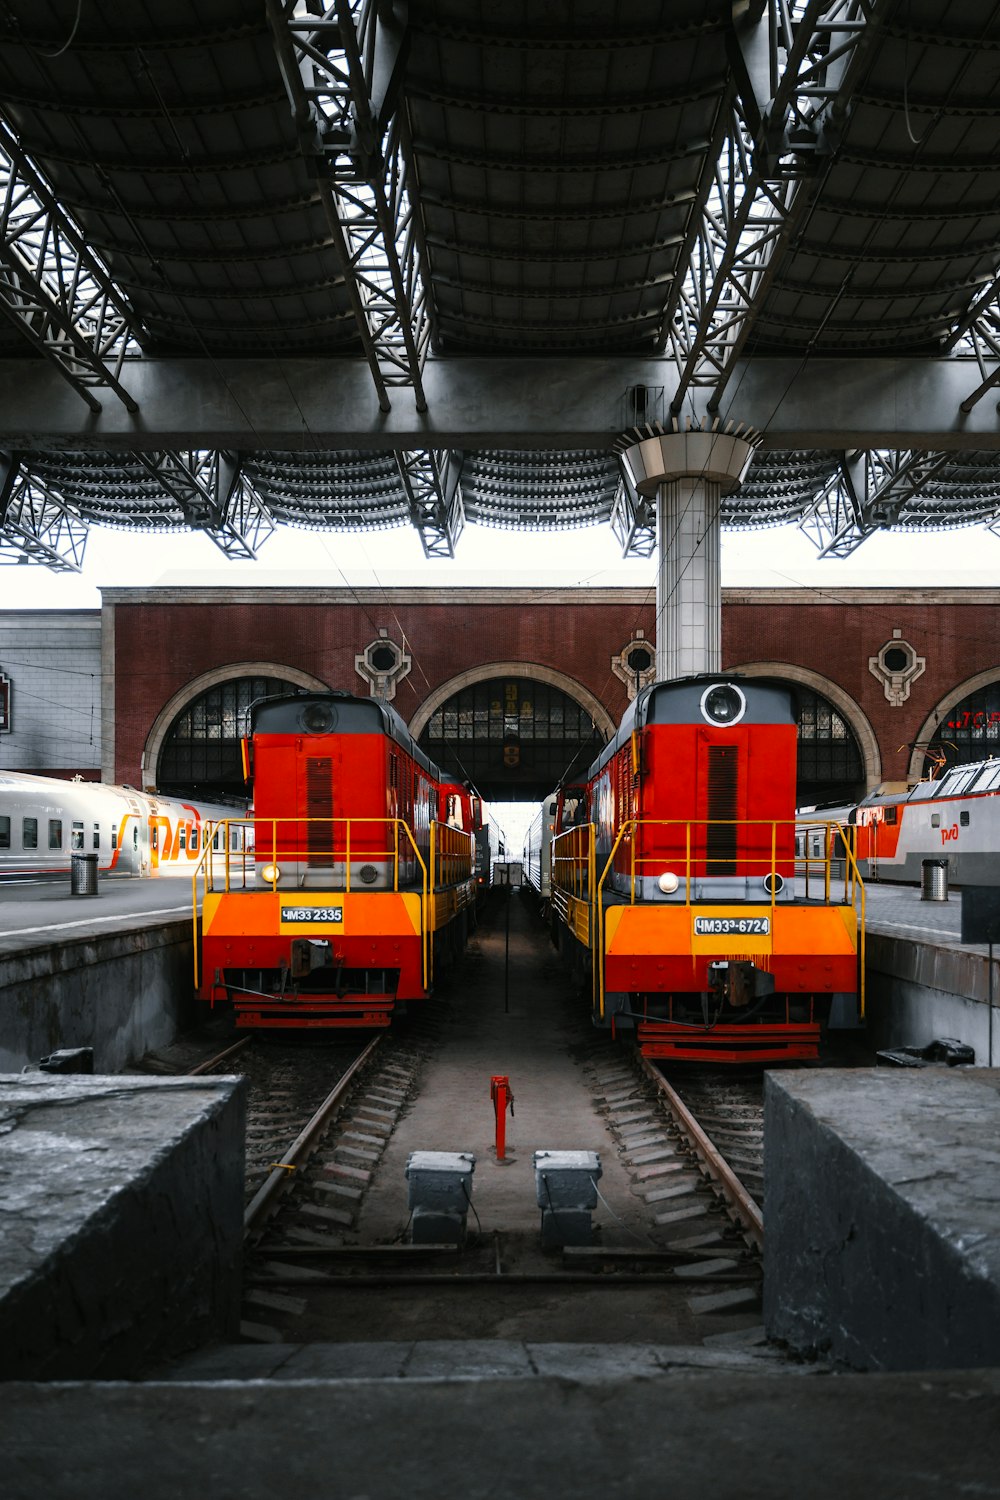 a couple of trains that are sitting in a train station